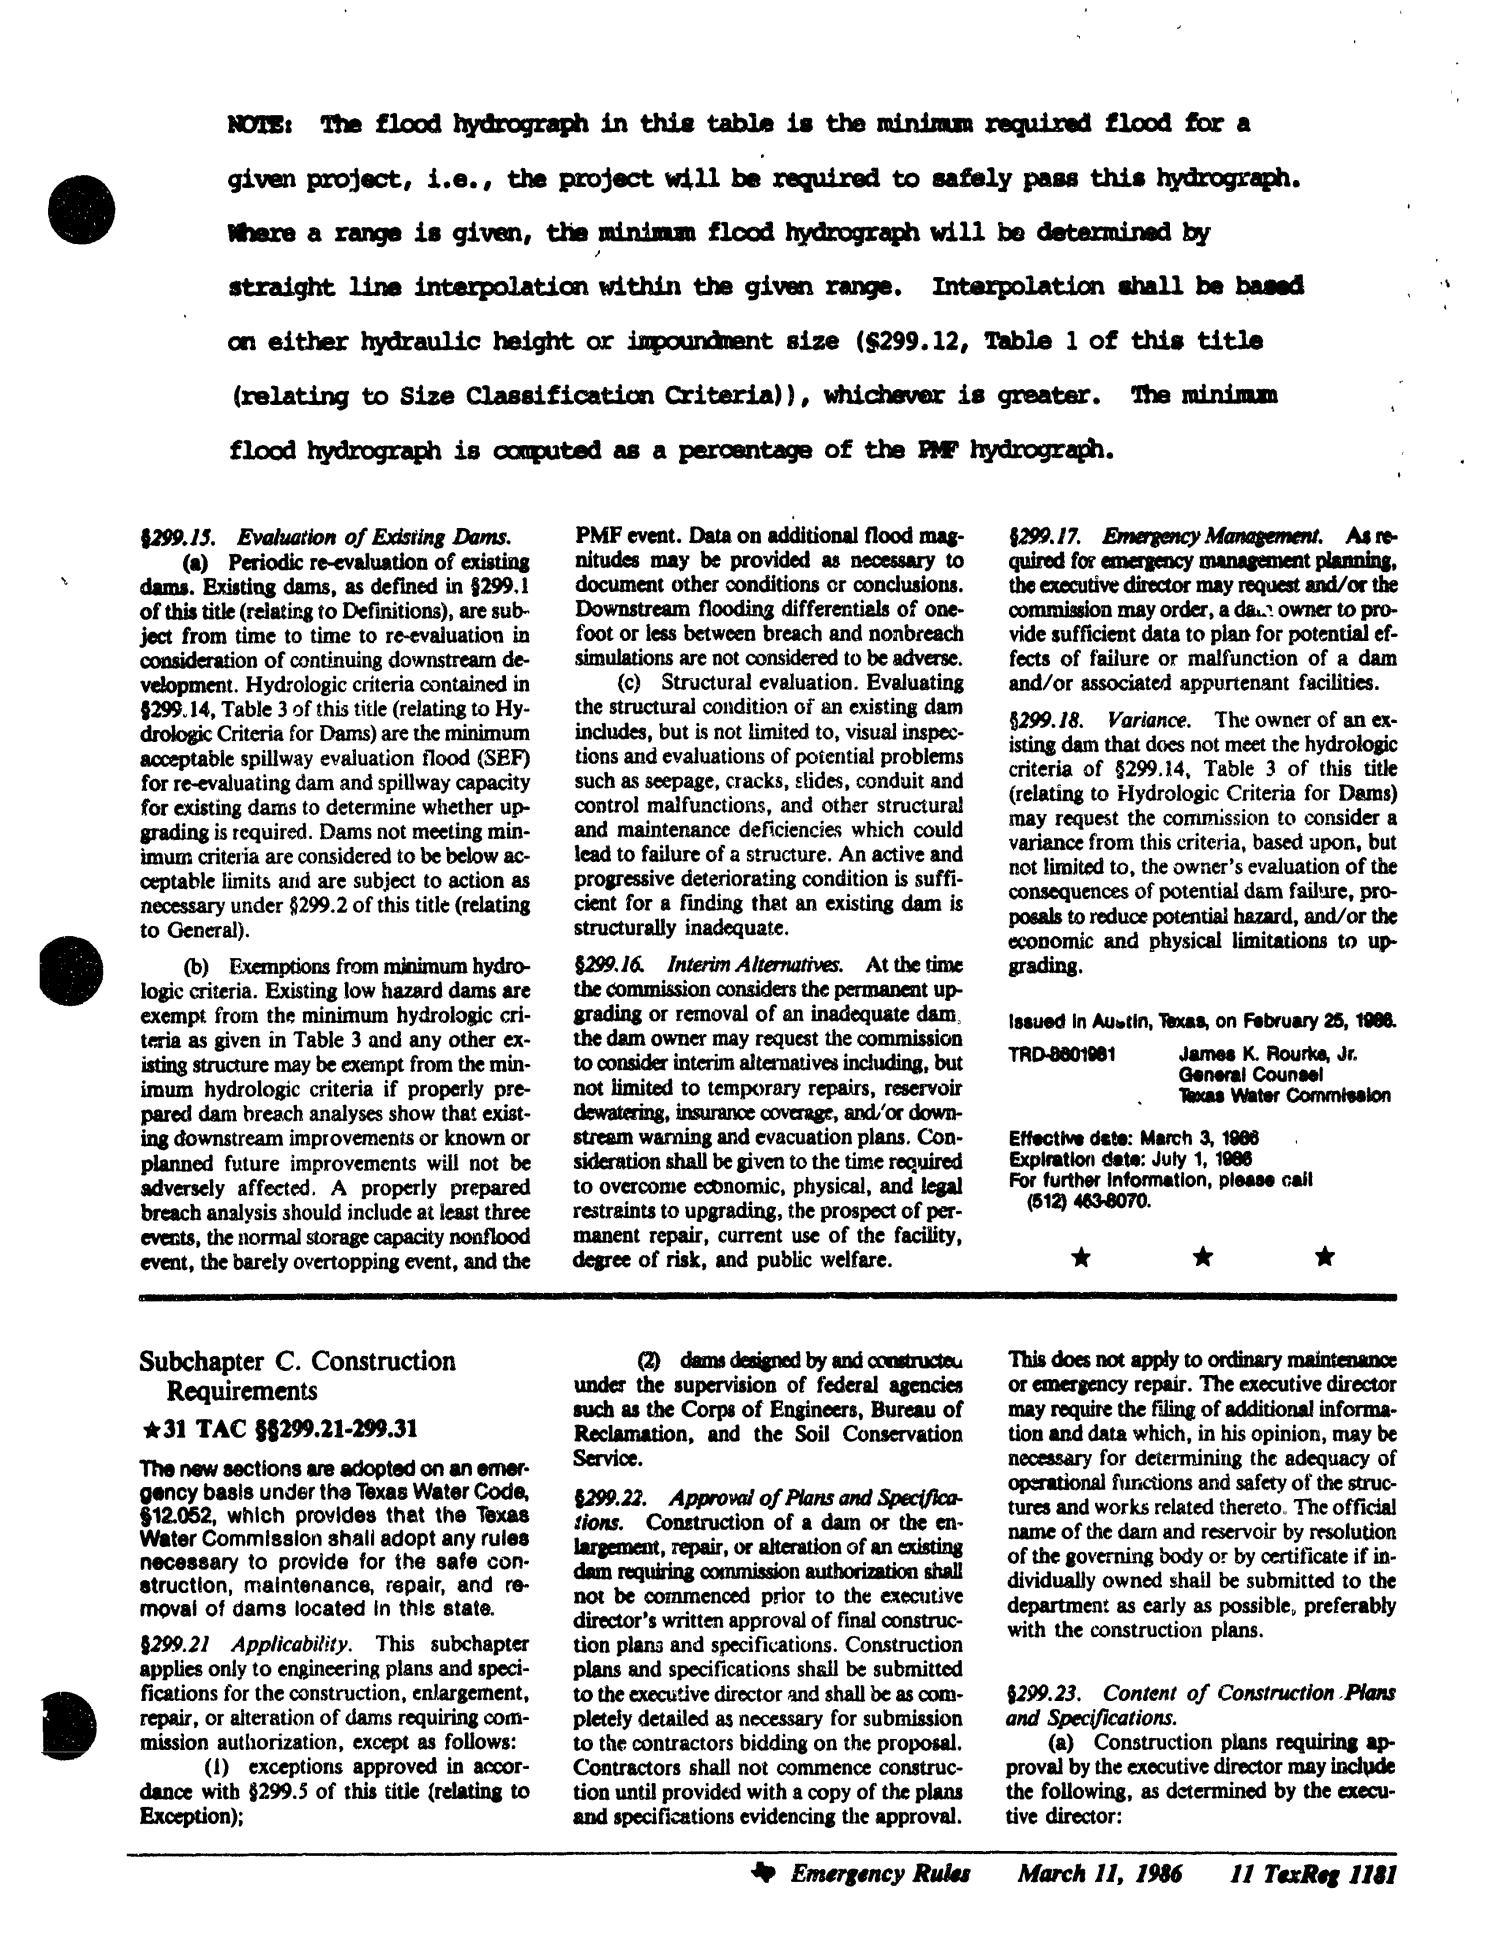 Texas Register, Volume 11, Number 19, Pages 1163-1244, March 11, 1986
                                                
                                                    1181
                                                